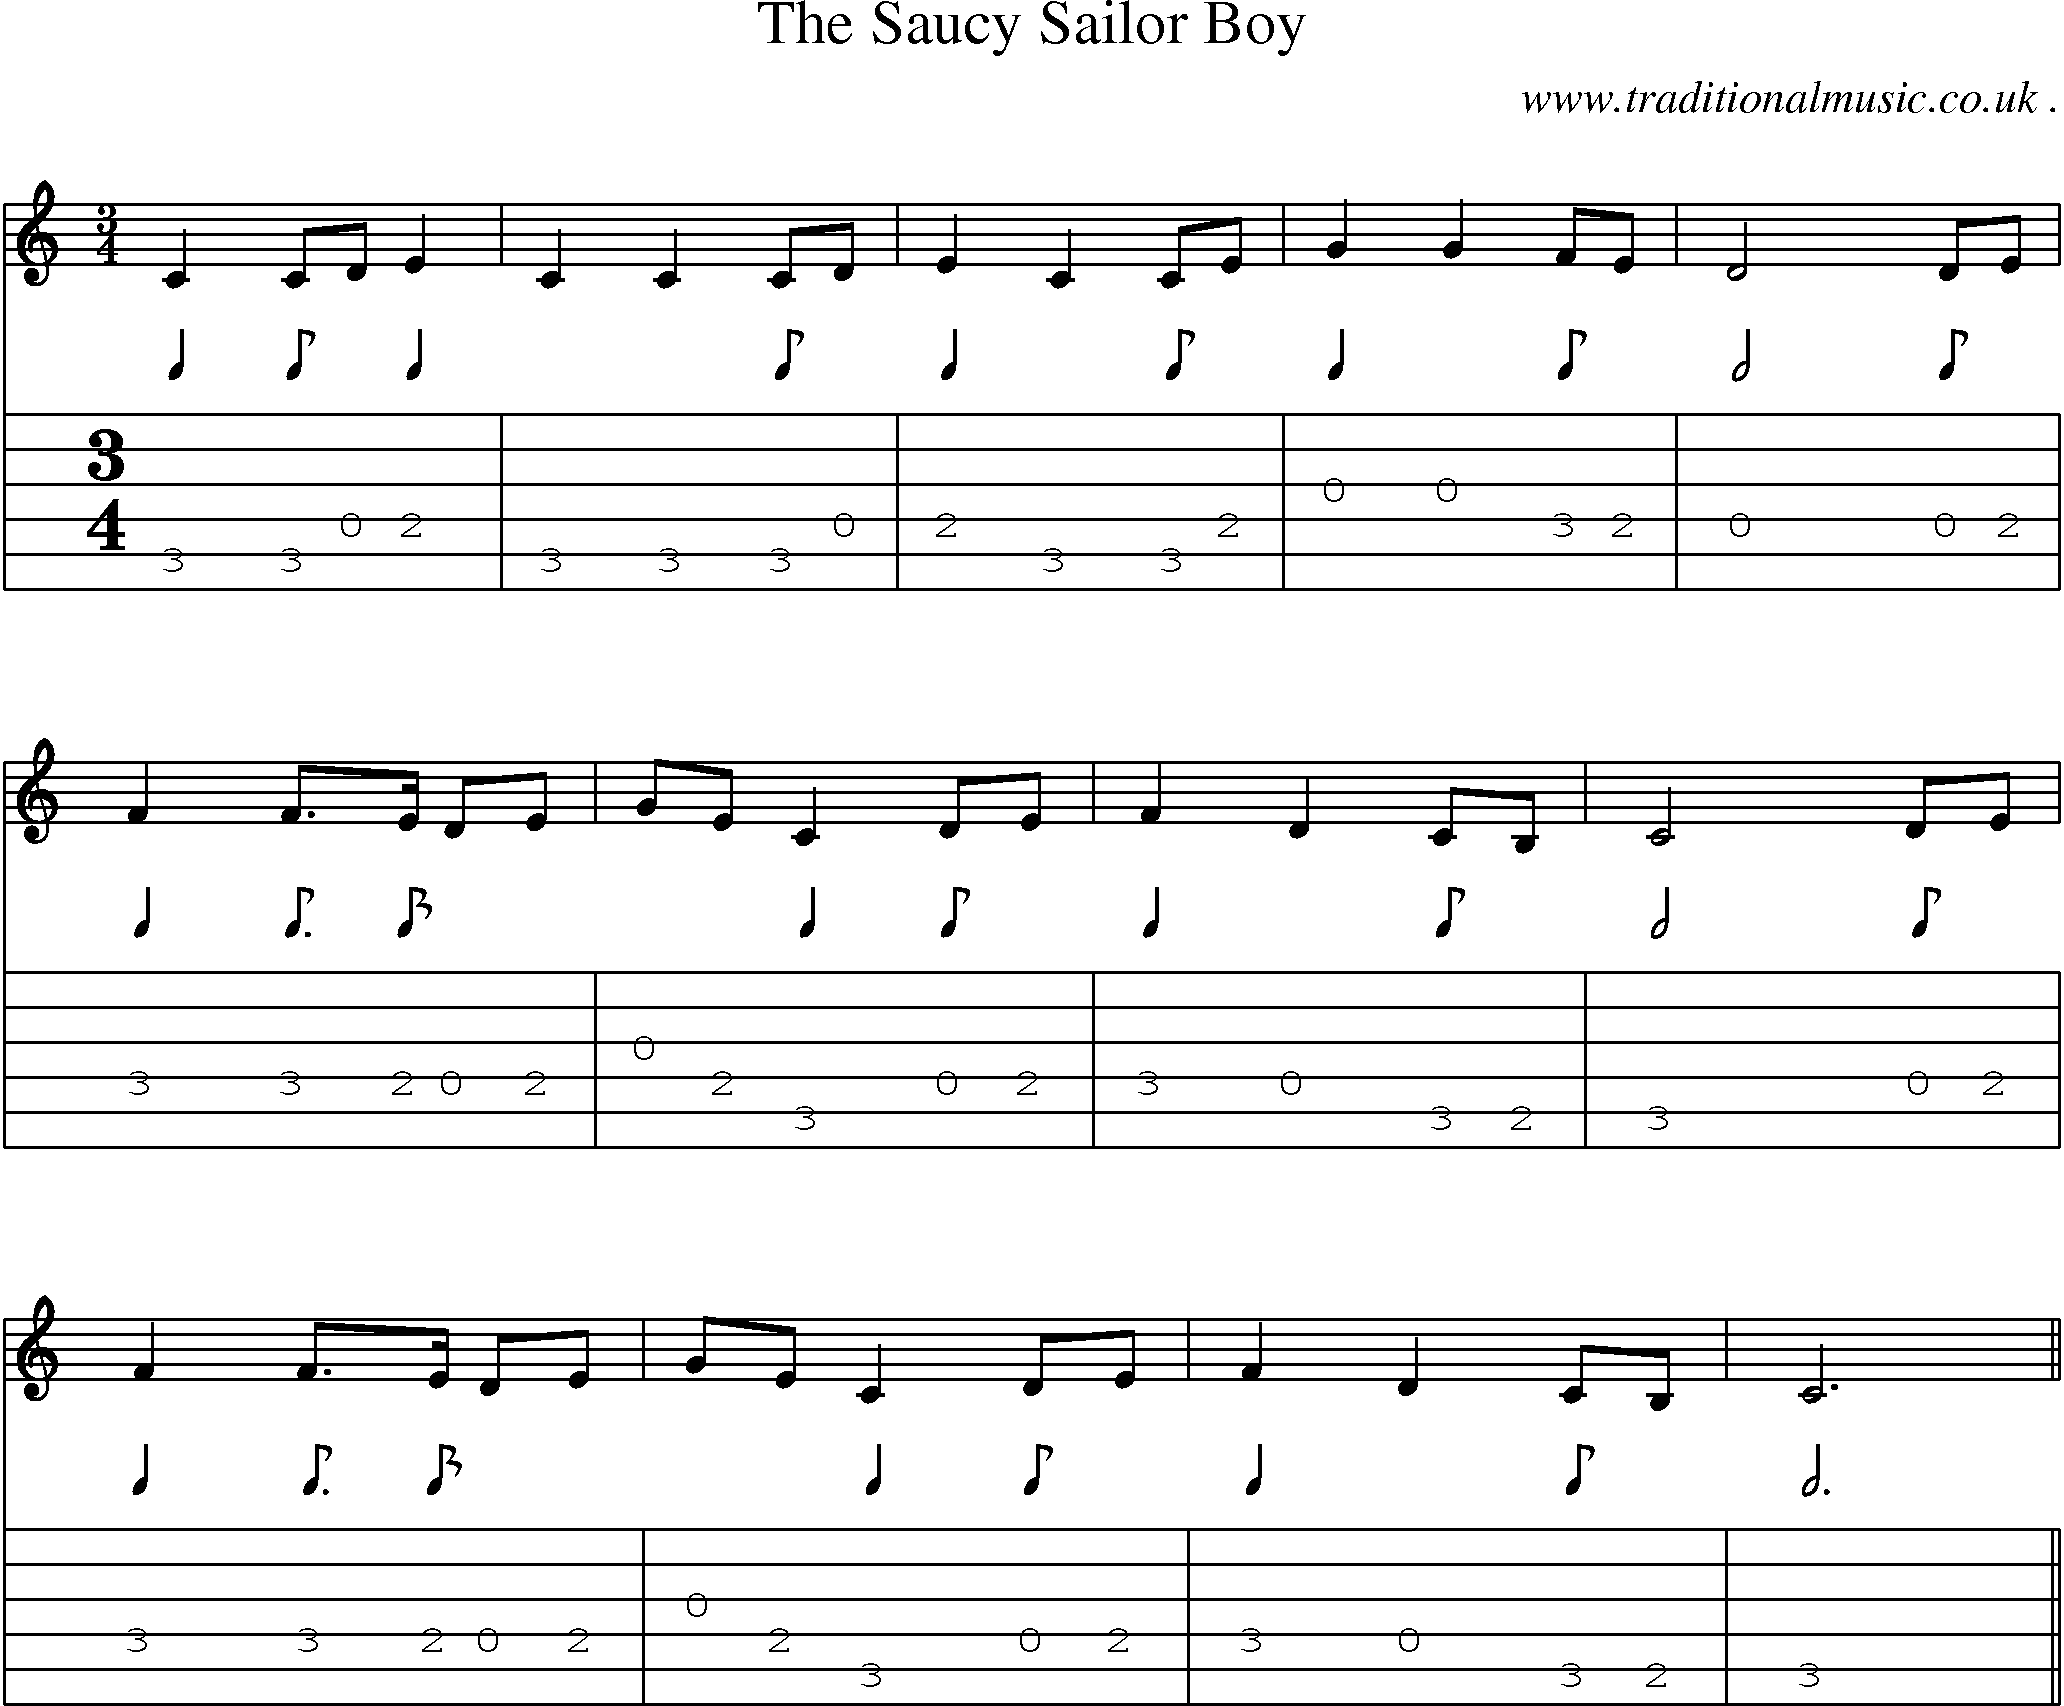 Sheet-Music and Guitar Tabs for The Saucy Sailor Boy